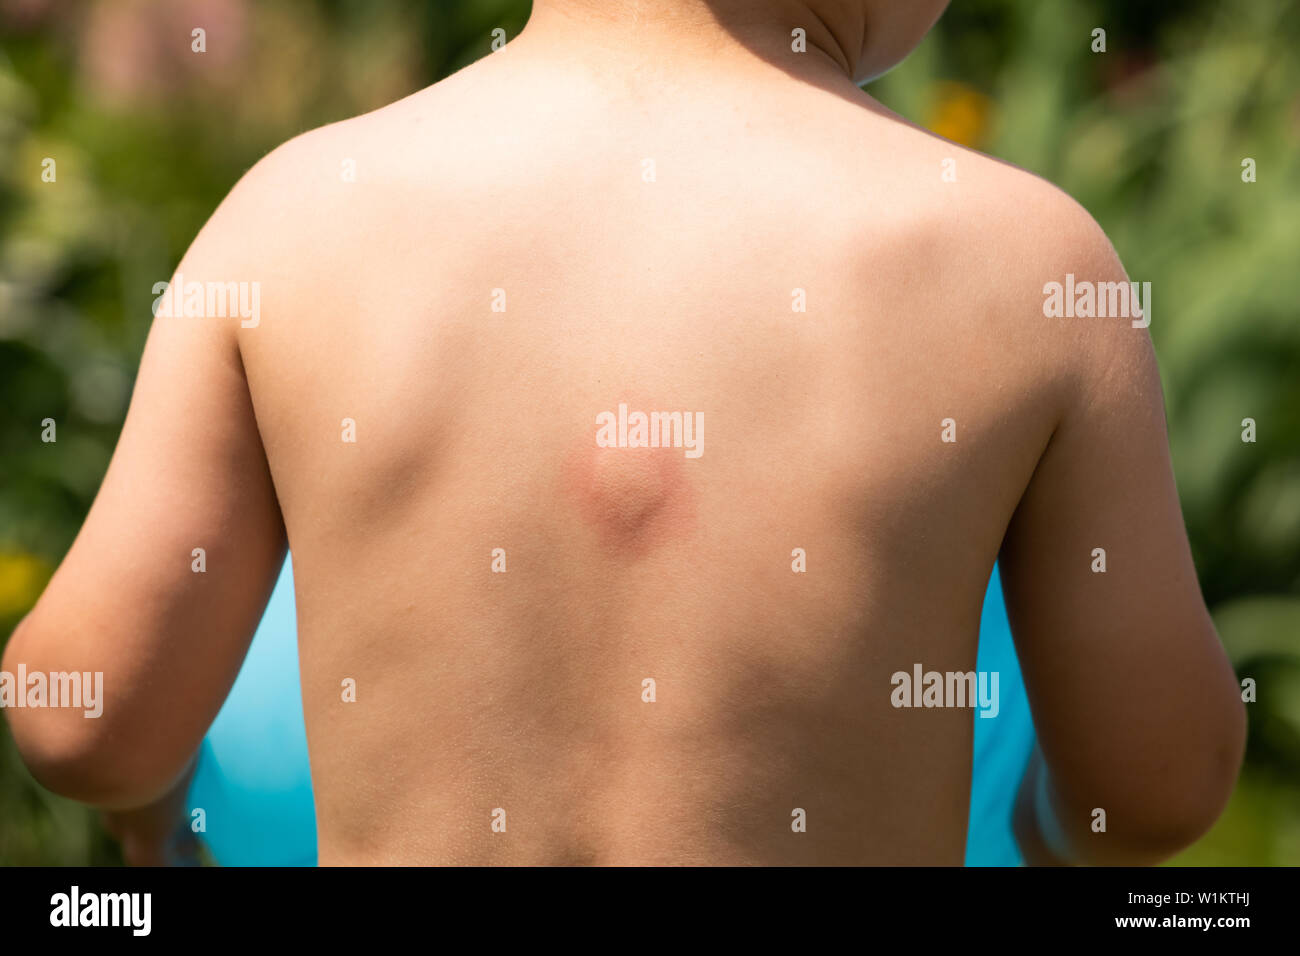 Description: Large swollen insect bite mark on baby's back Stock Photo